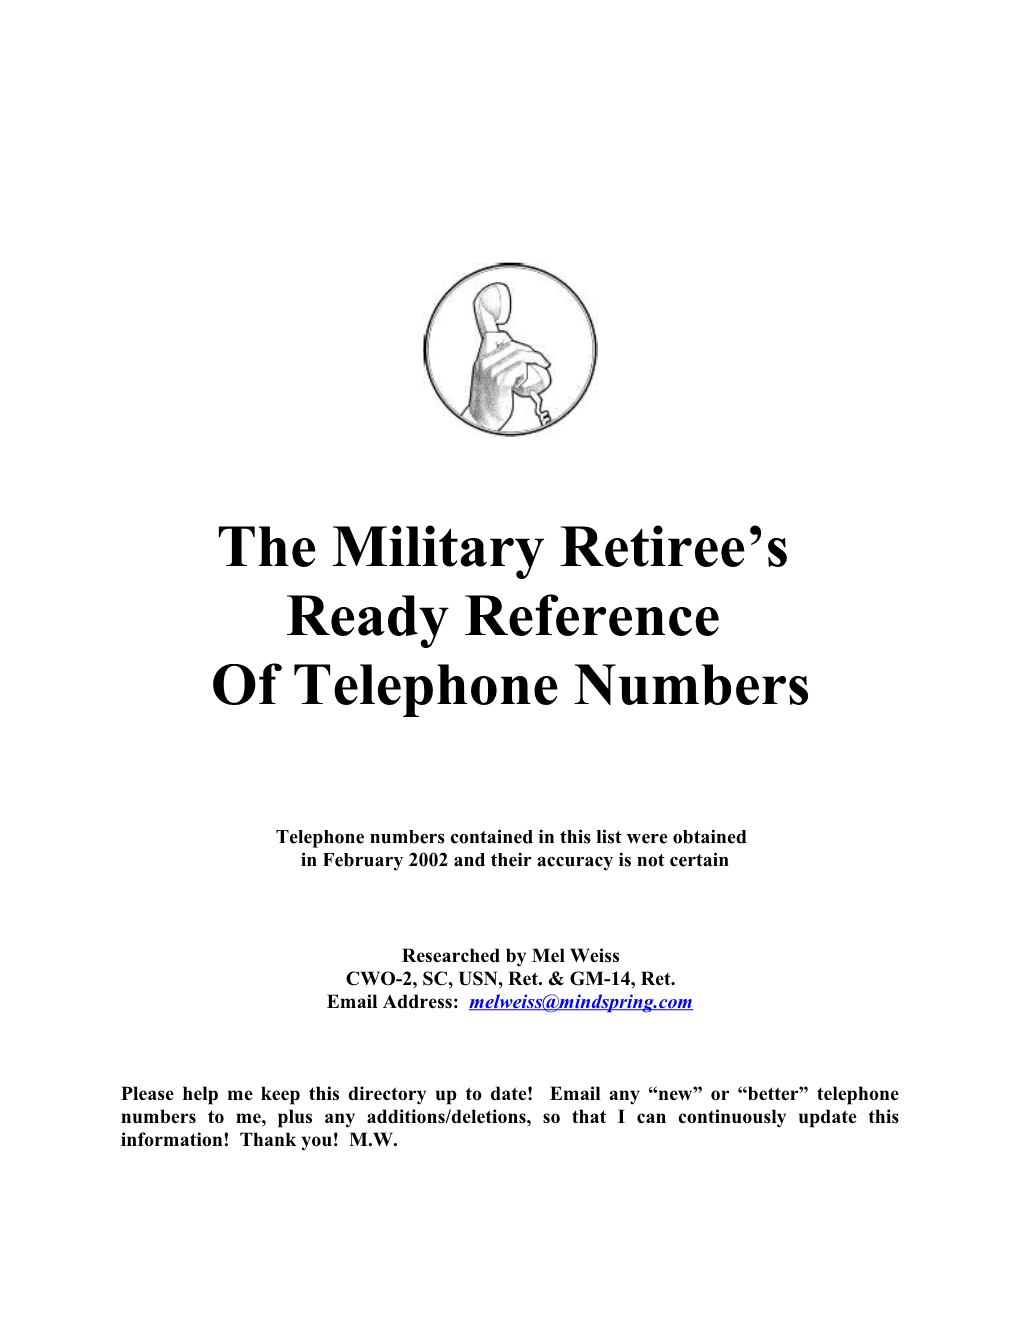 Military Retirees Ready Reference Phone Numbers